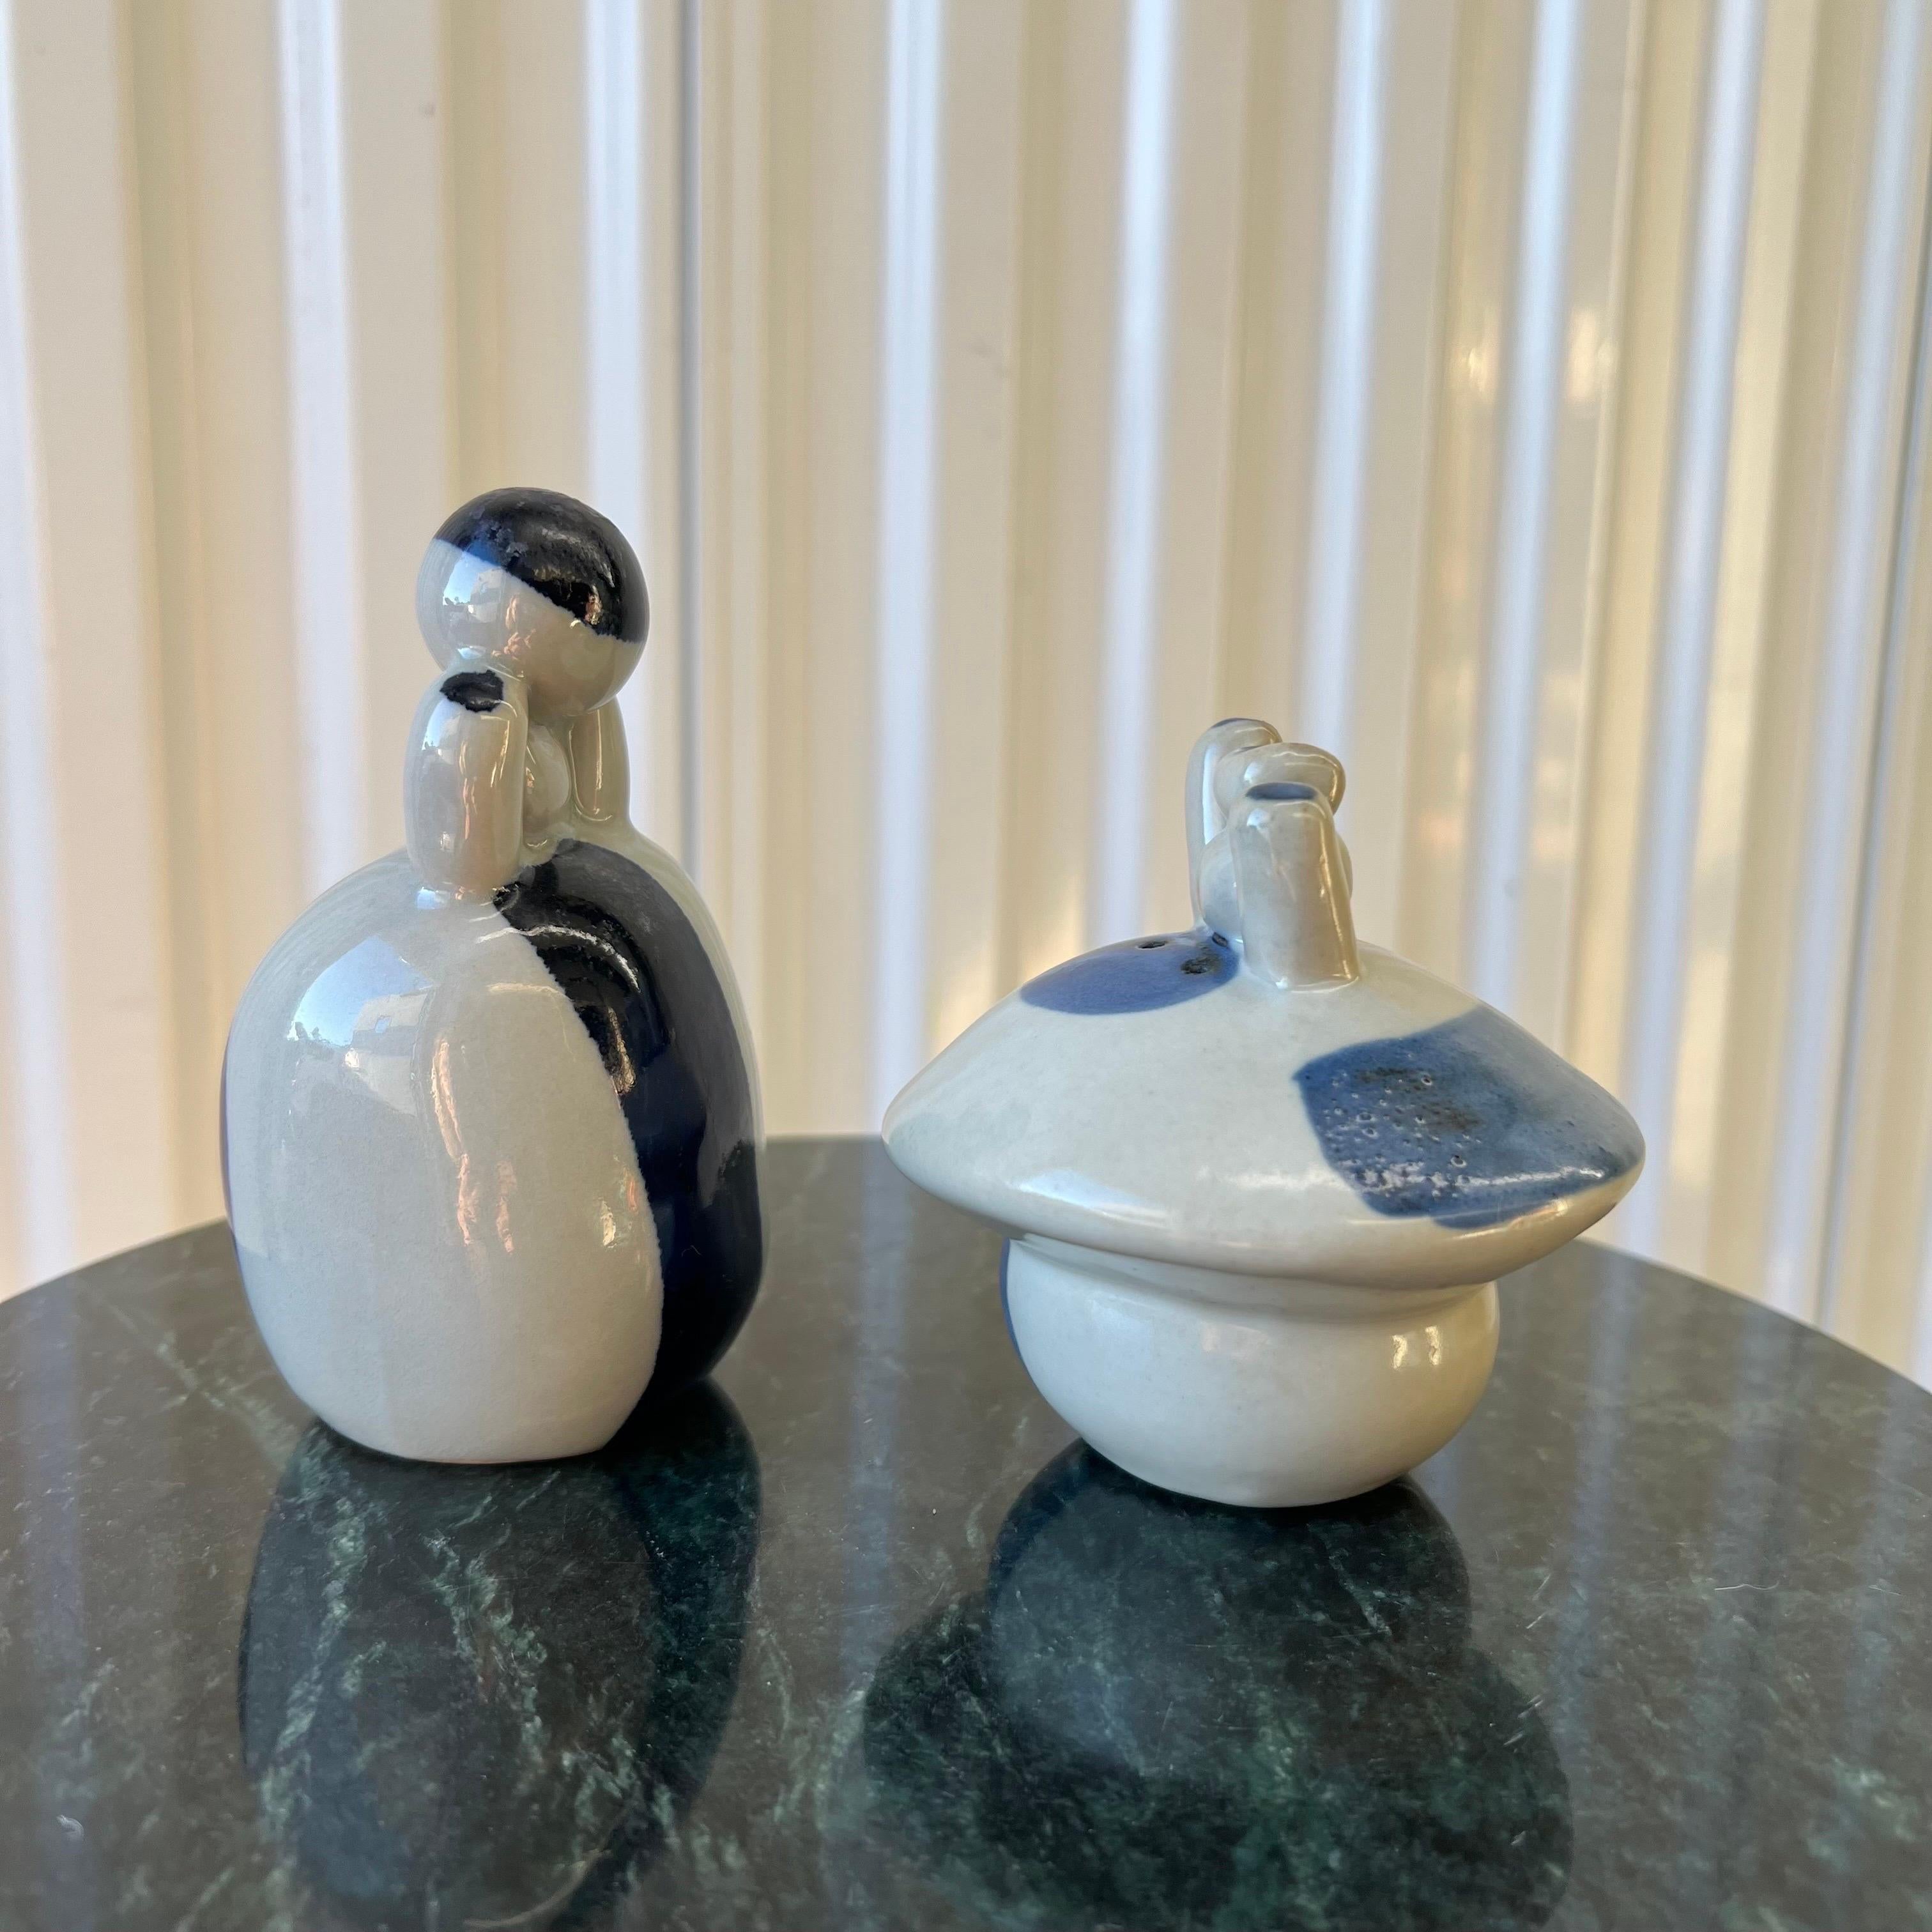 Glazed Vintage Figurative Studio Pottery Salt and Pepper Shakers - a Pair For Sale